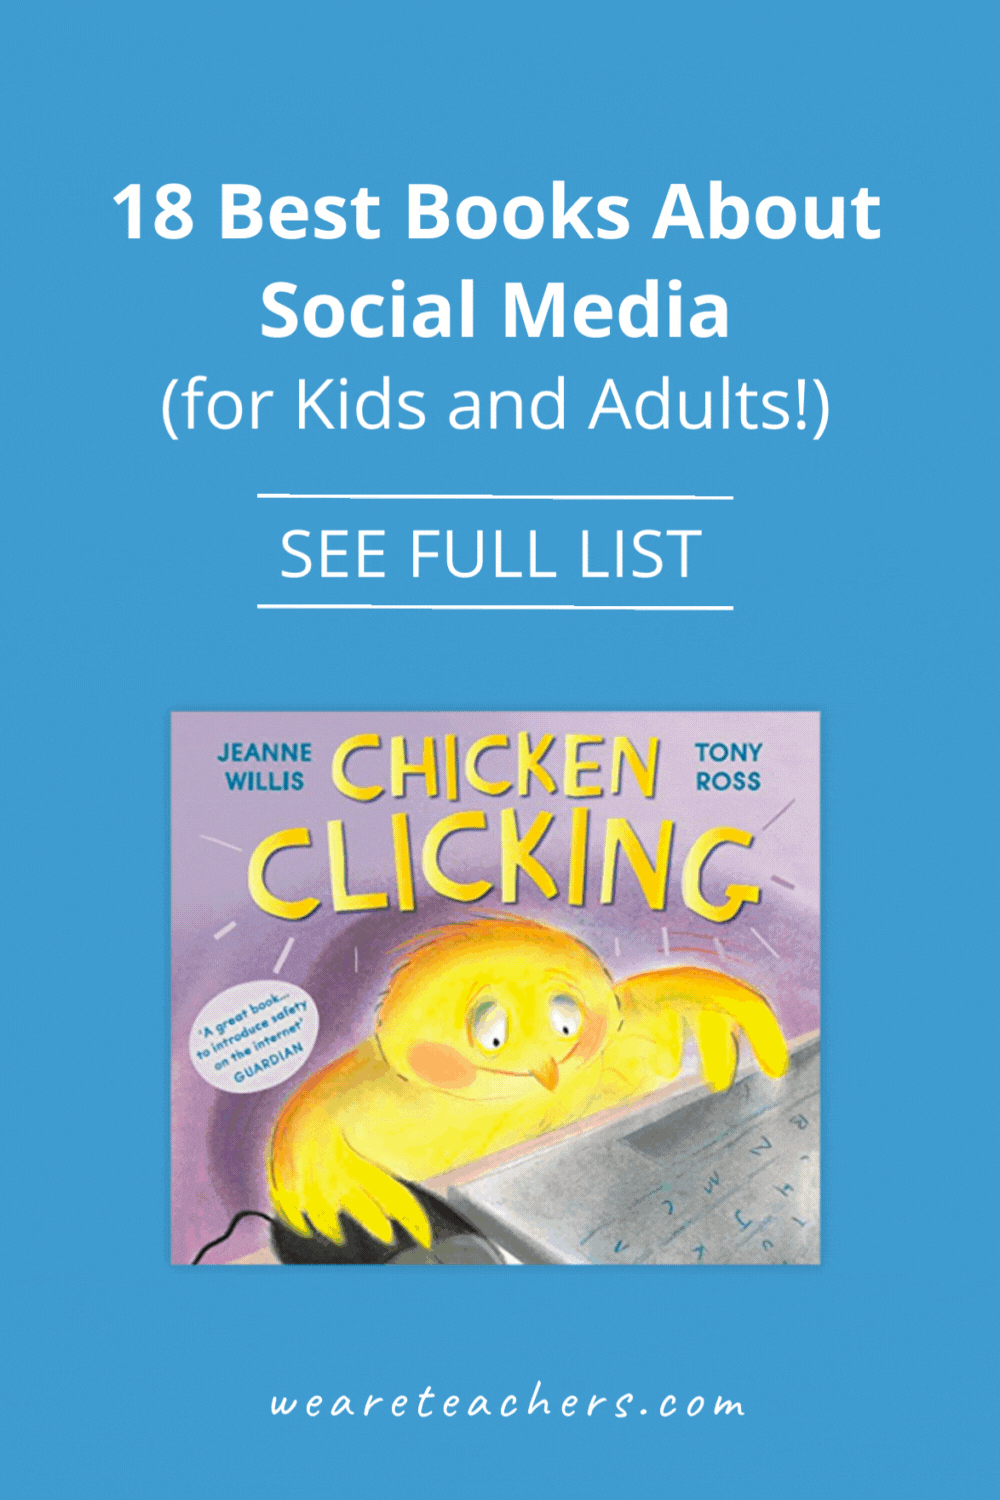 We rounded up the best books about social media and included picks for both kids (Sonia's Digital World!) and adults (Influenced!).